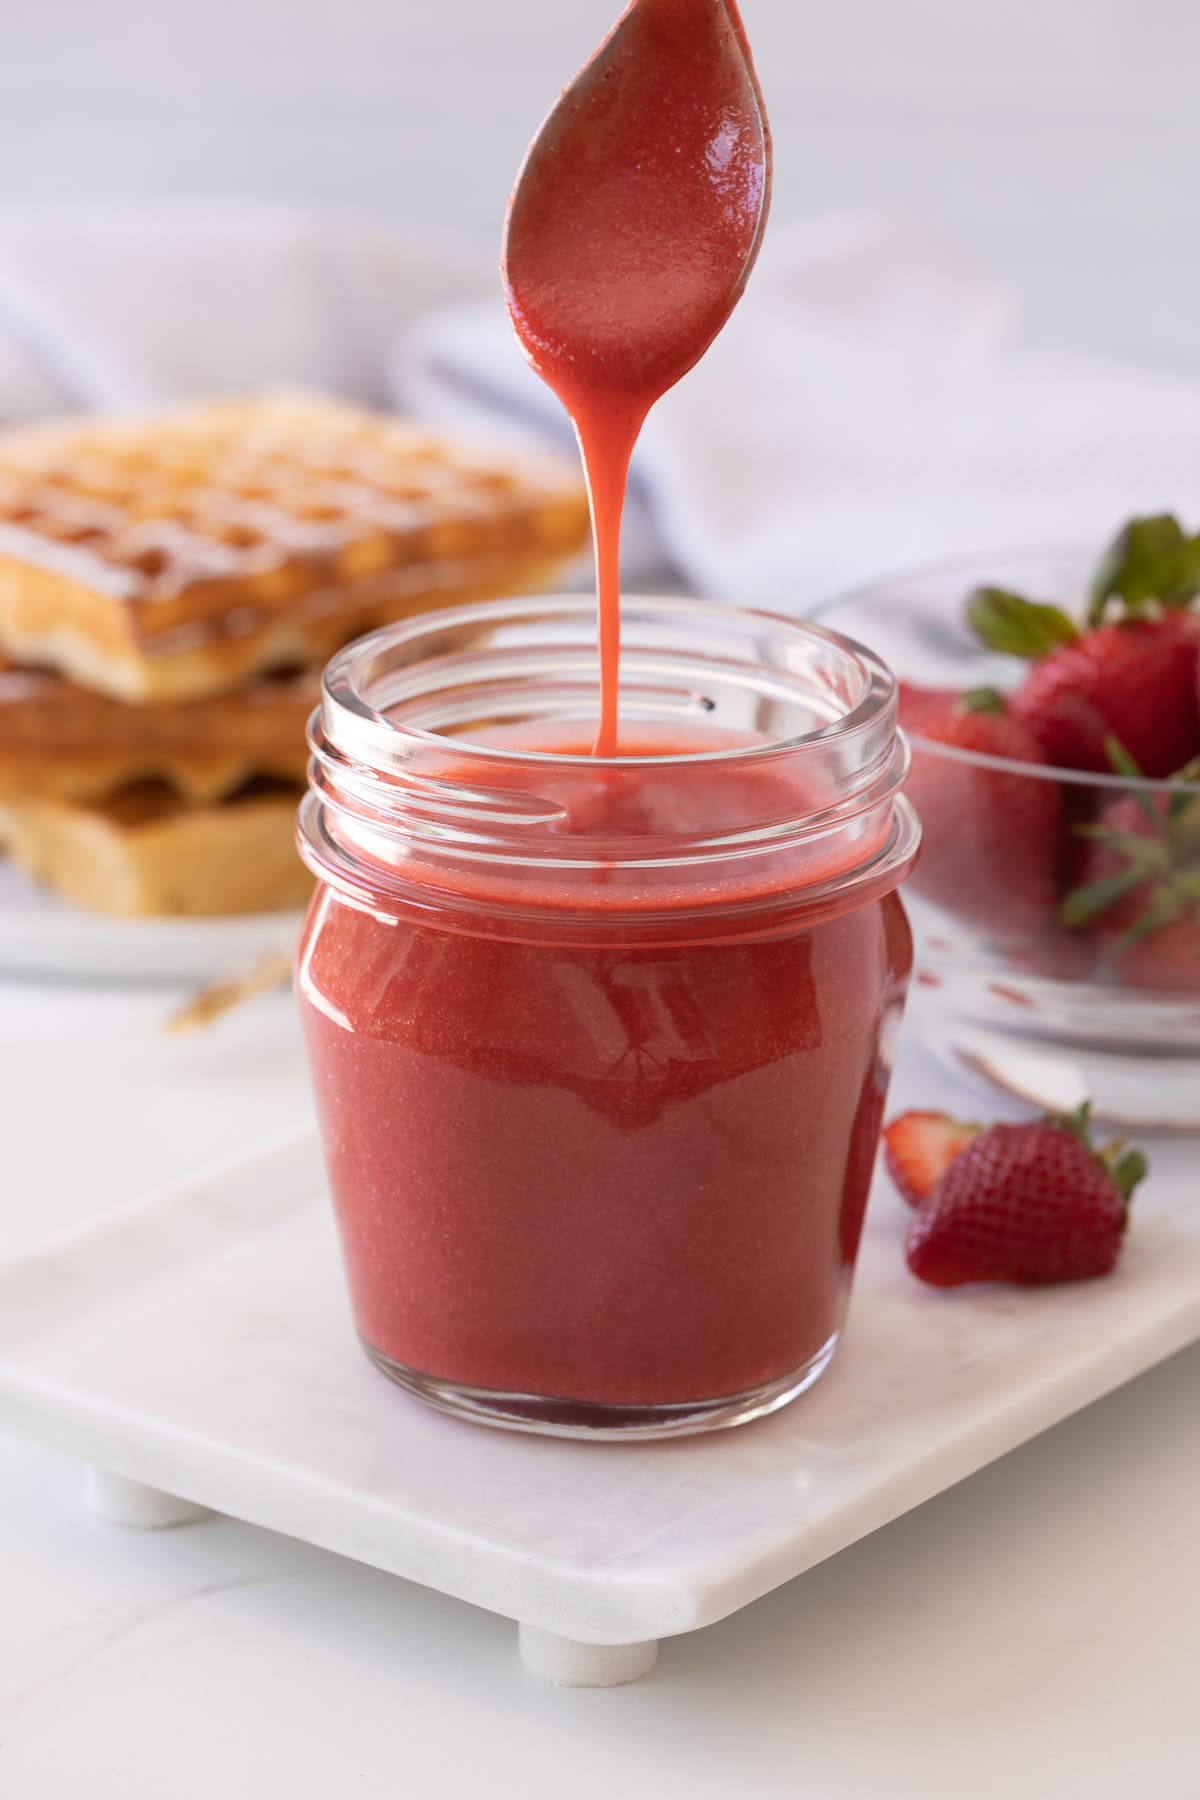 Fresh strawberry coulis, ready for a stack of waffles and breakfast.